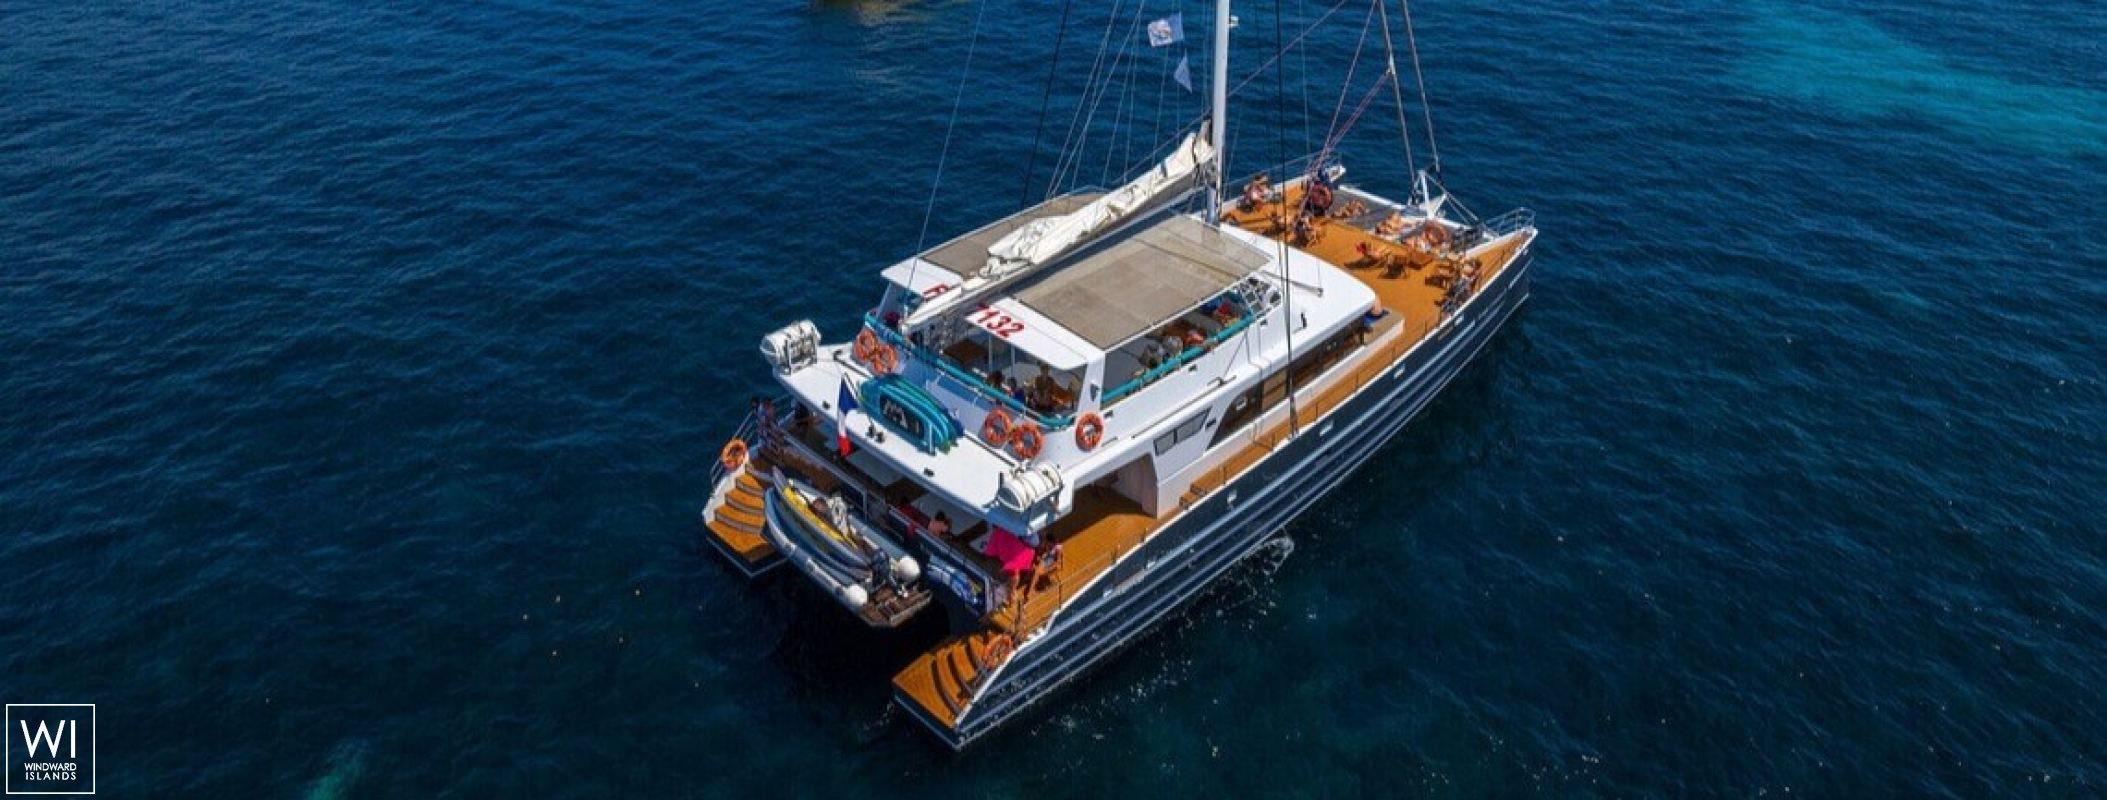 Catamaran Catamaran 25m Rivage CroisiÈre Ii Available For Day Charters Cannes French Riviera 